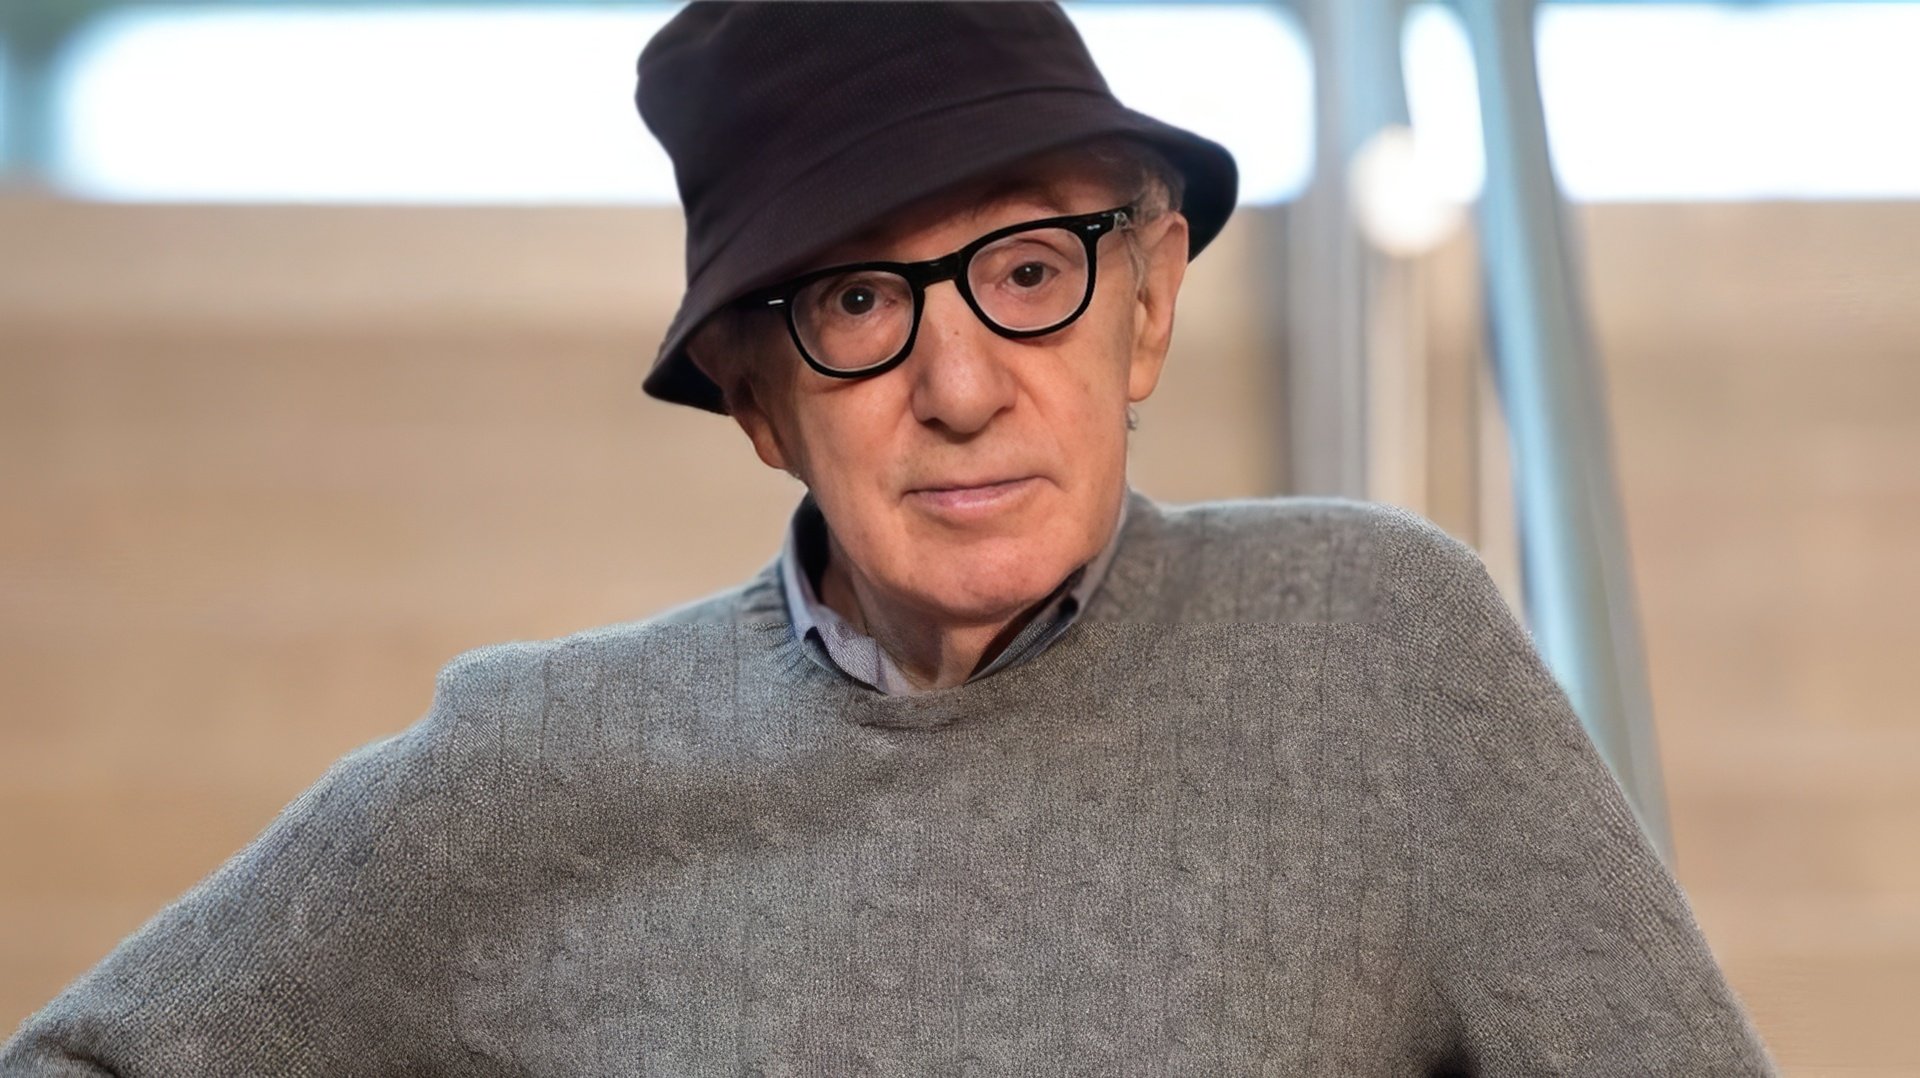 Woody Allen continues to make films despite age and past scandals